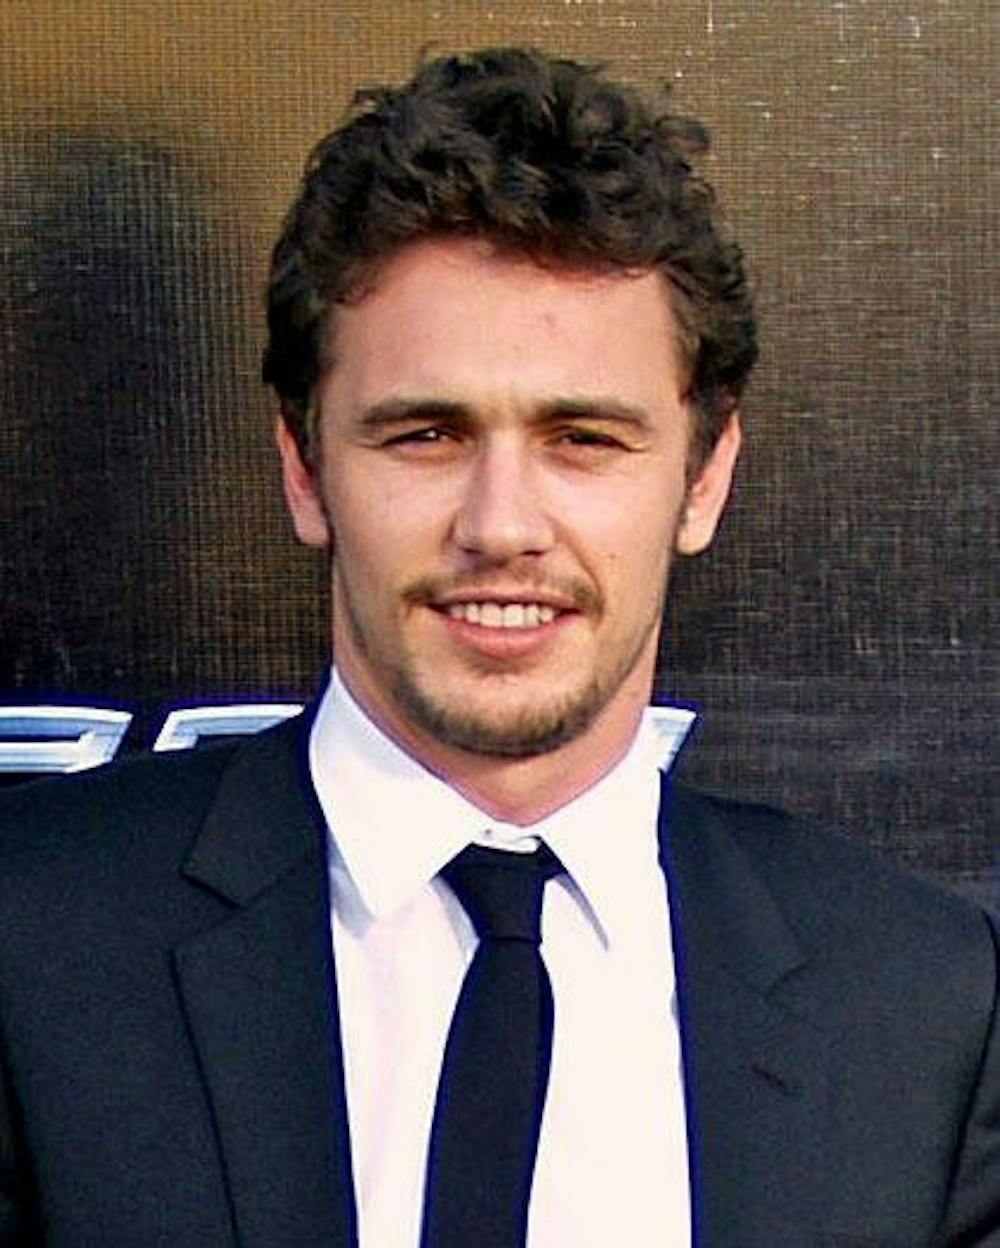 Academy Award nominated actor James Franco’s production company showed interest in filming at Miami but was denied.